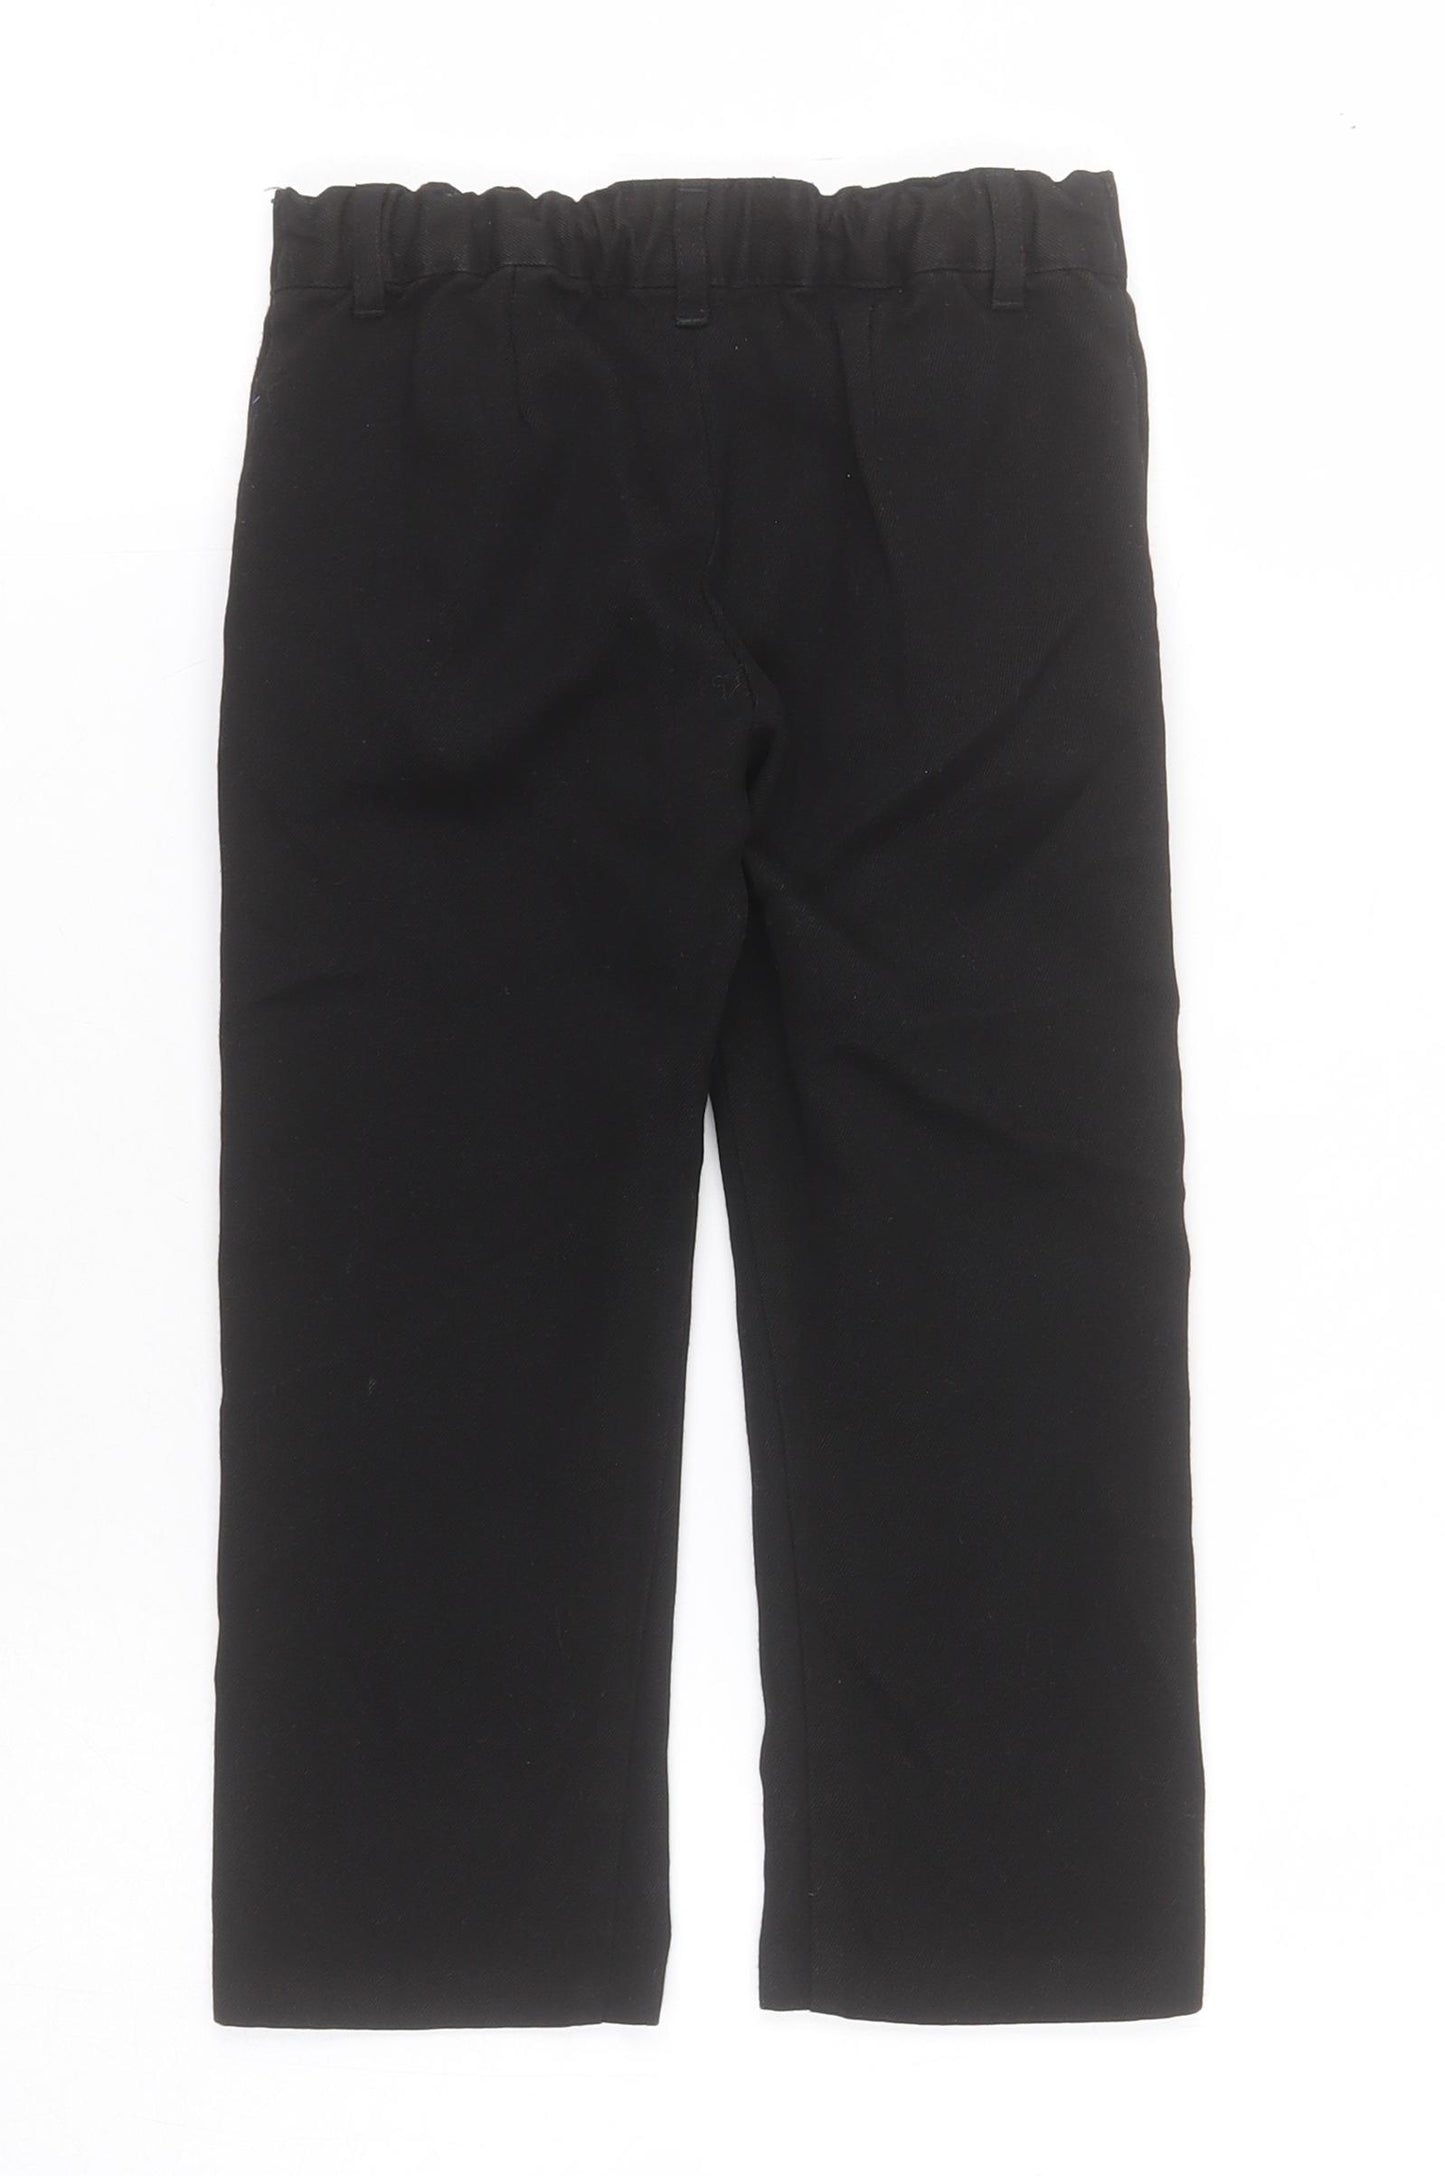 F&F Boys Black  Polyester Dress Pants Trousers Size 3-4 Years  Regular Pullover - School